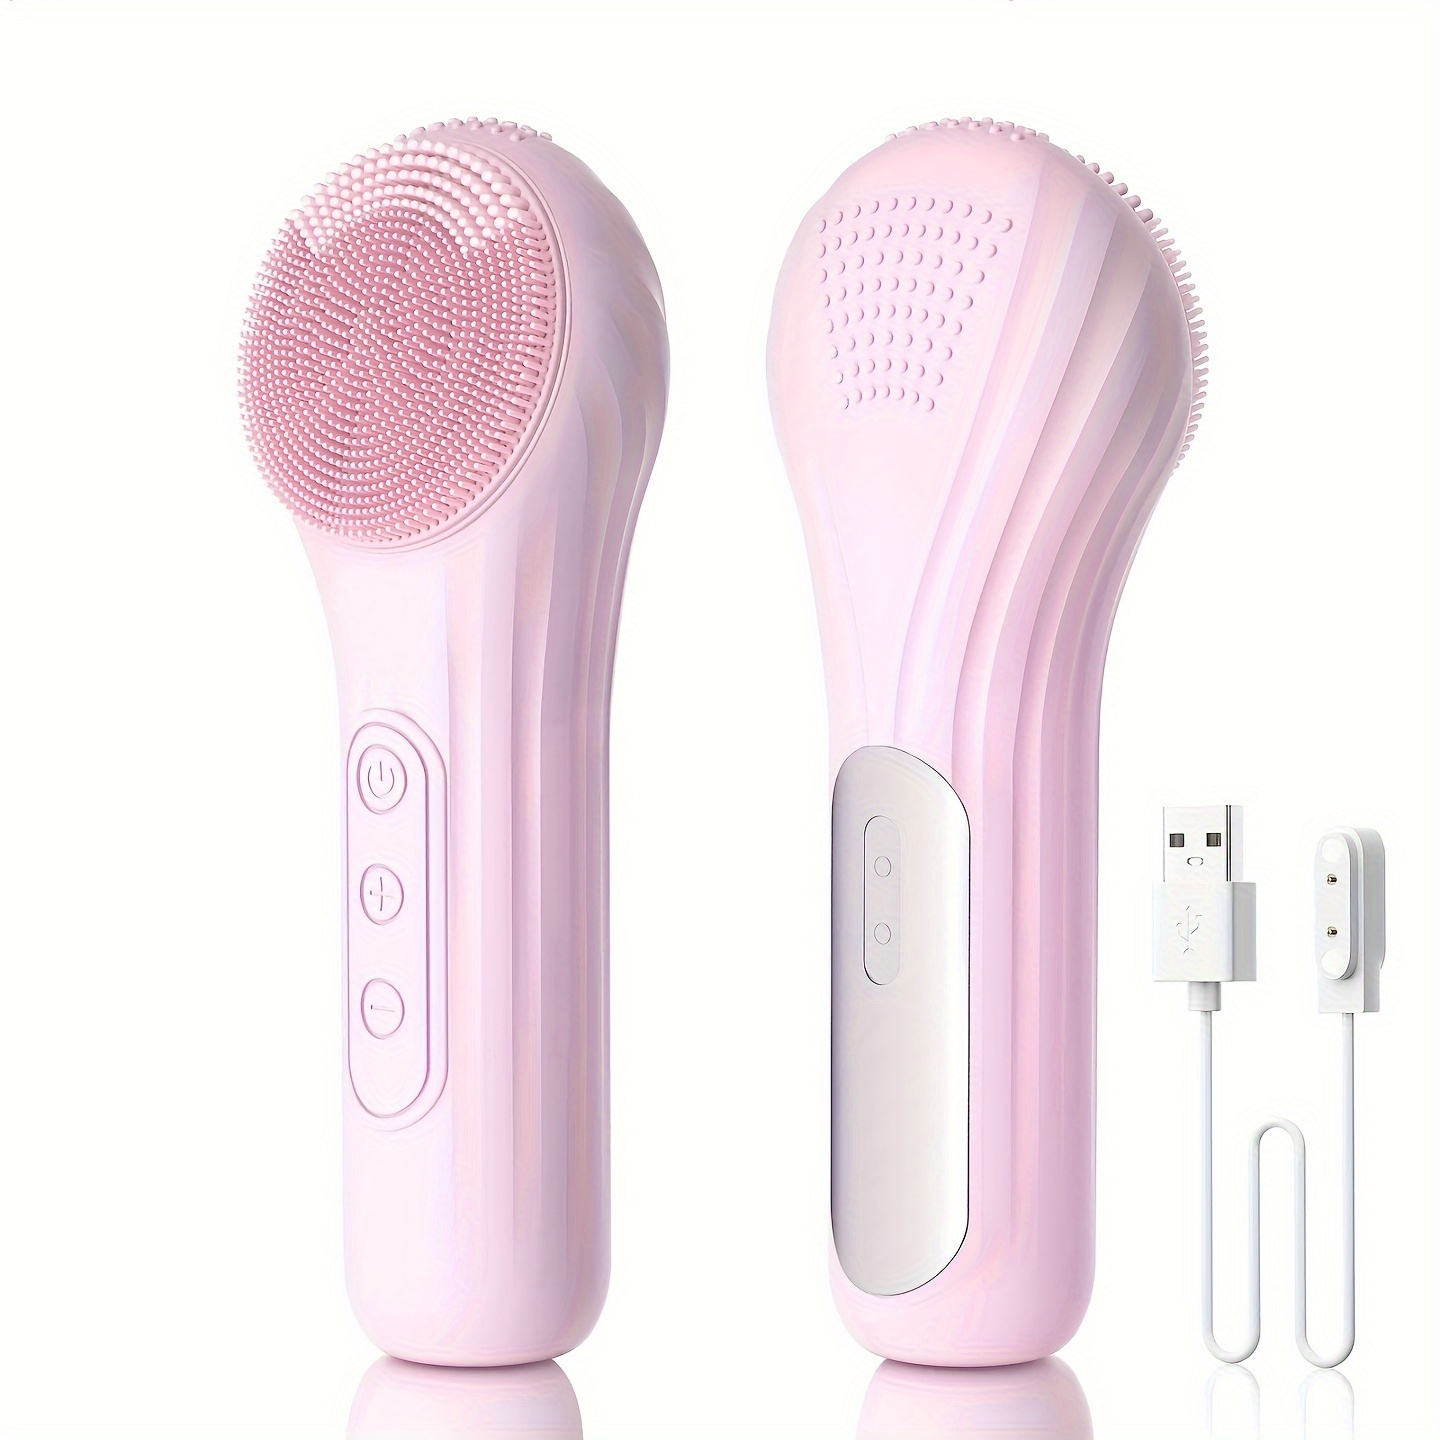 

Electric Facial Cleanser Brush, Silicone Scrubber, Wash Brush For Men & Women, Rechargeable Constant Temperature Heating Vibration Massage Cleansing Brush For Pore Cleansing Exfoliating Removal